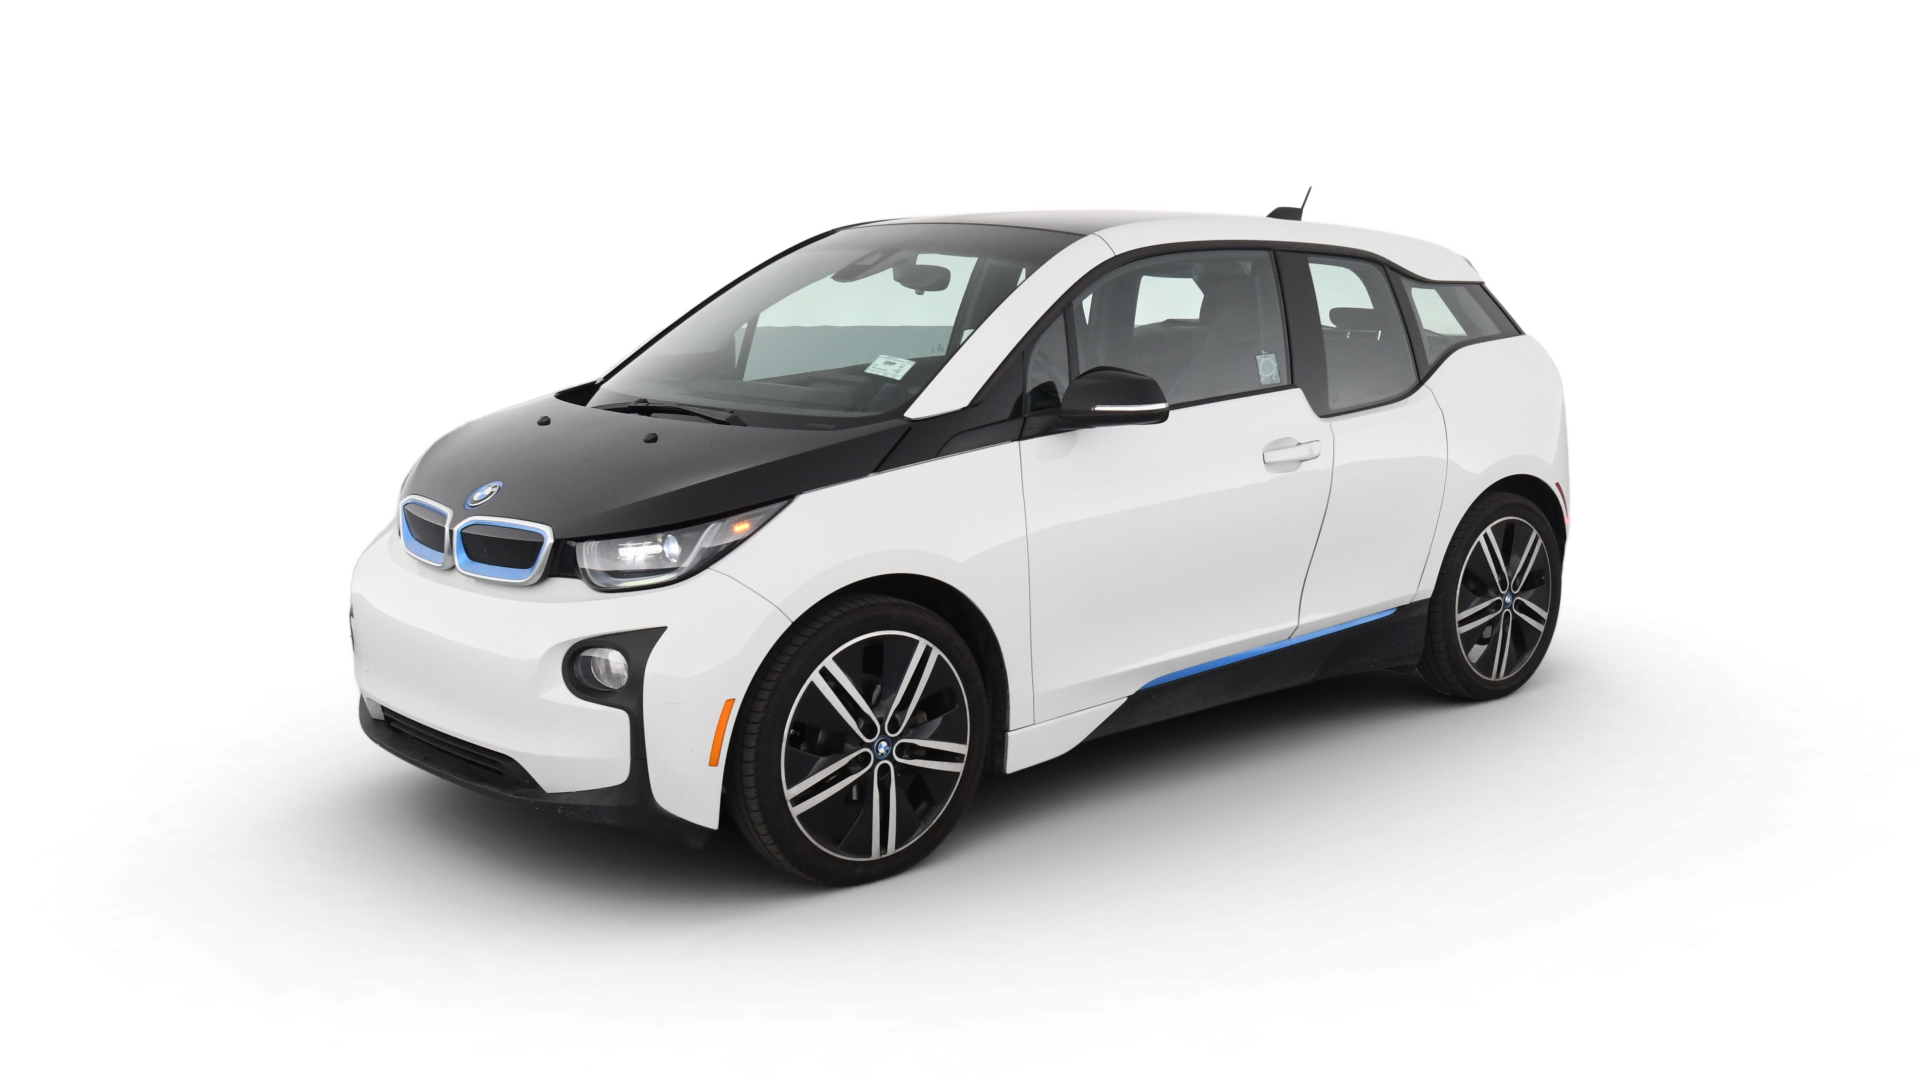 Used 2017 BMW i3 For Sale Online | Carvana